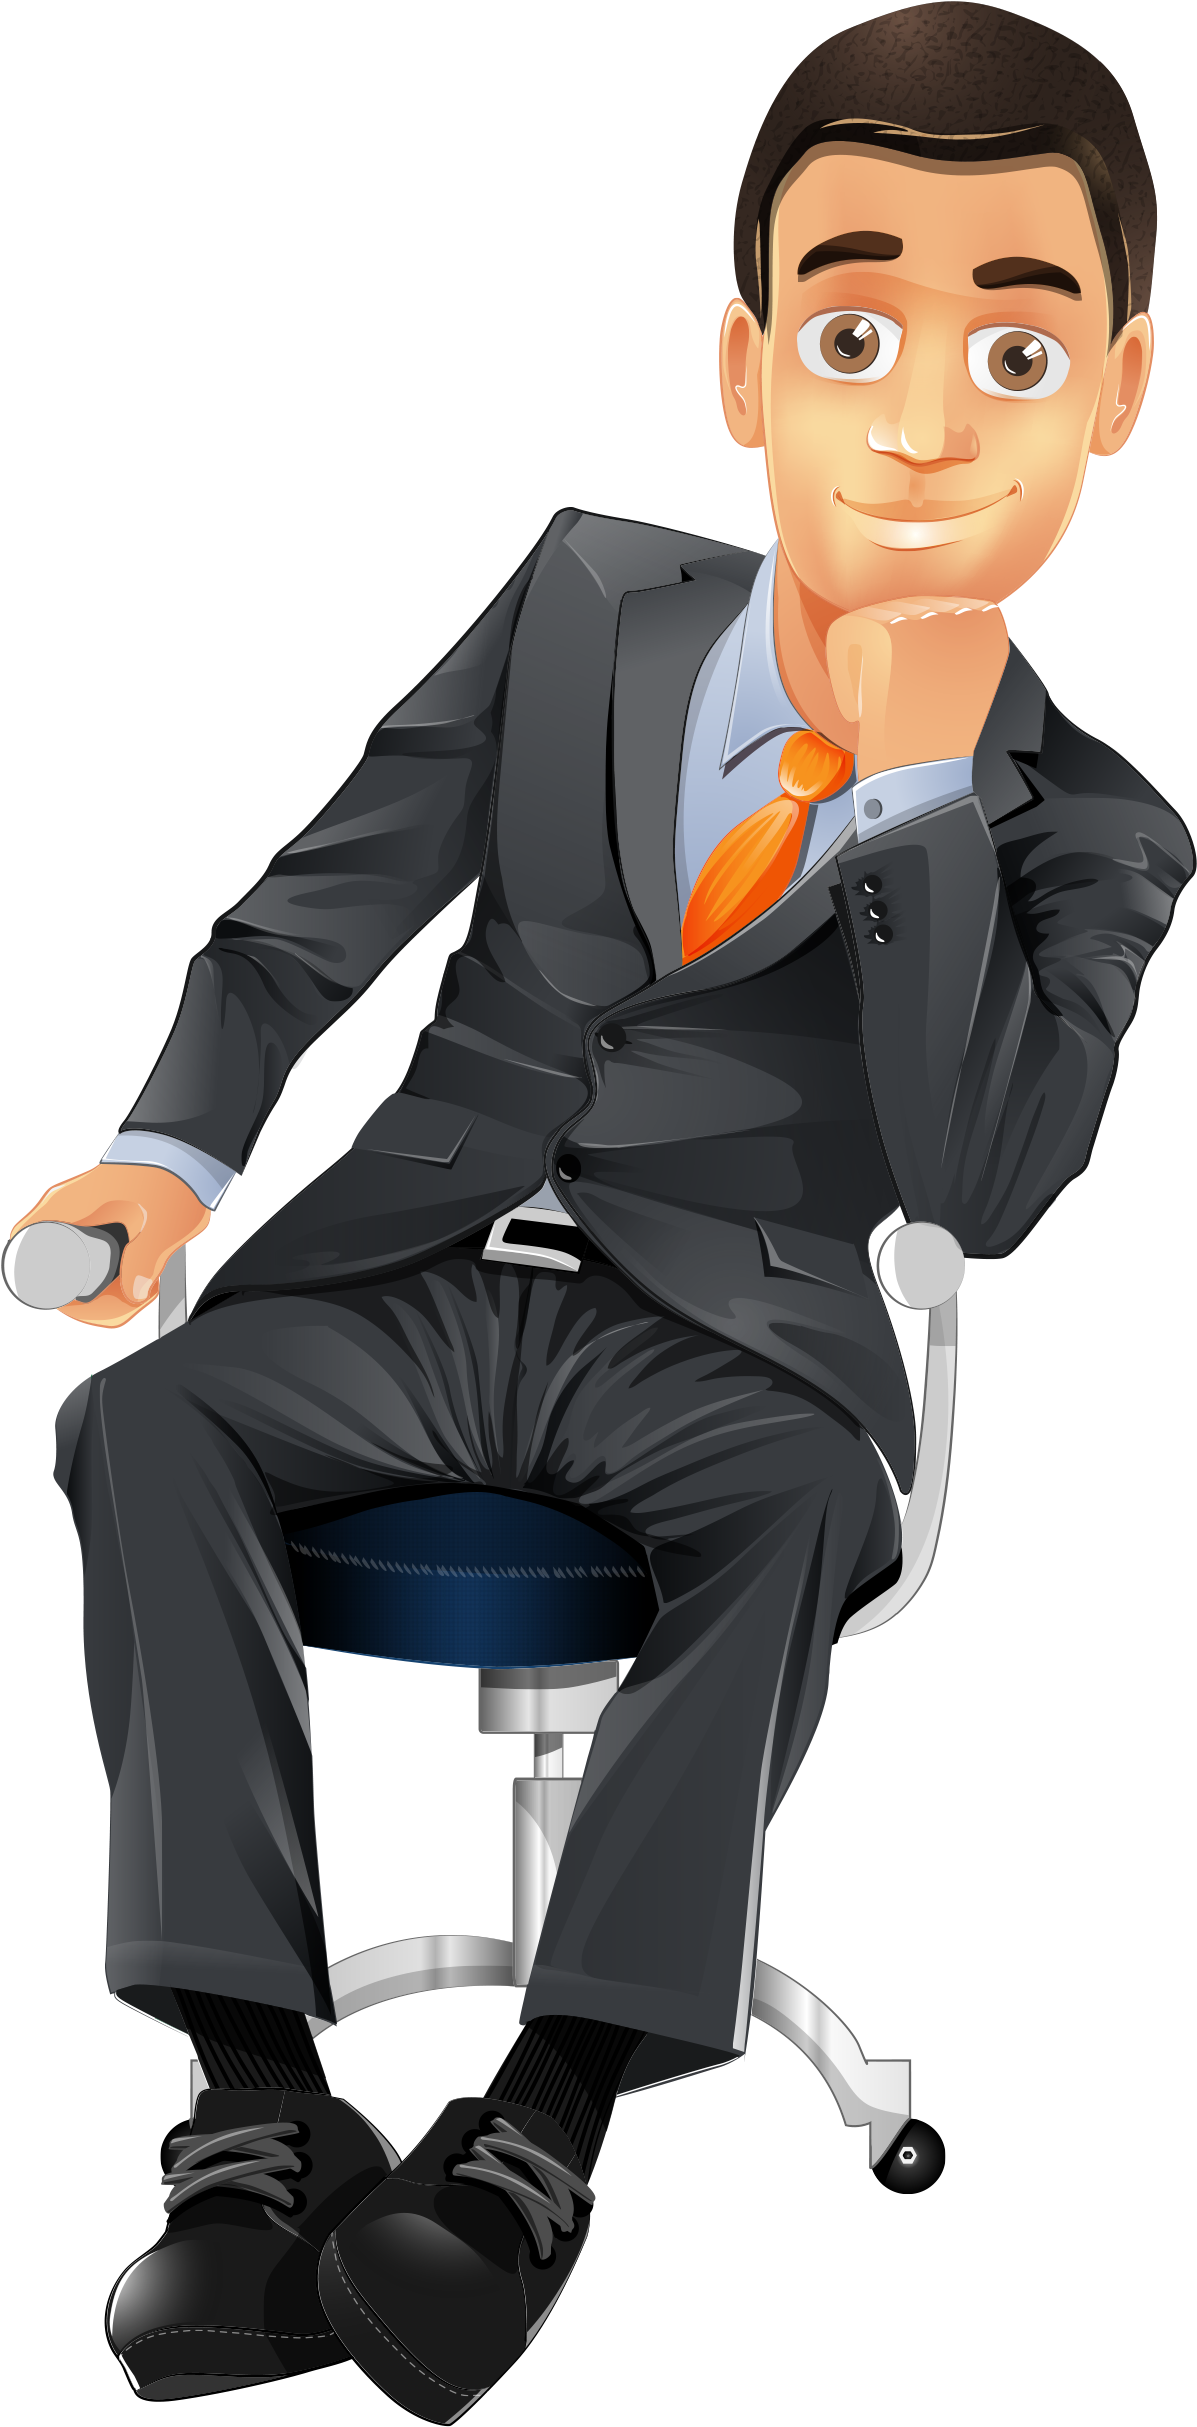 A Man In A Suit Sitting In A Chair